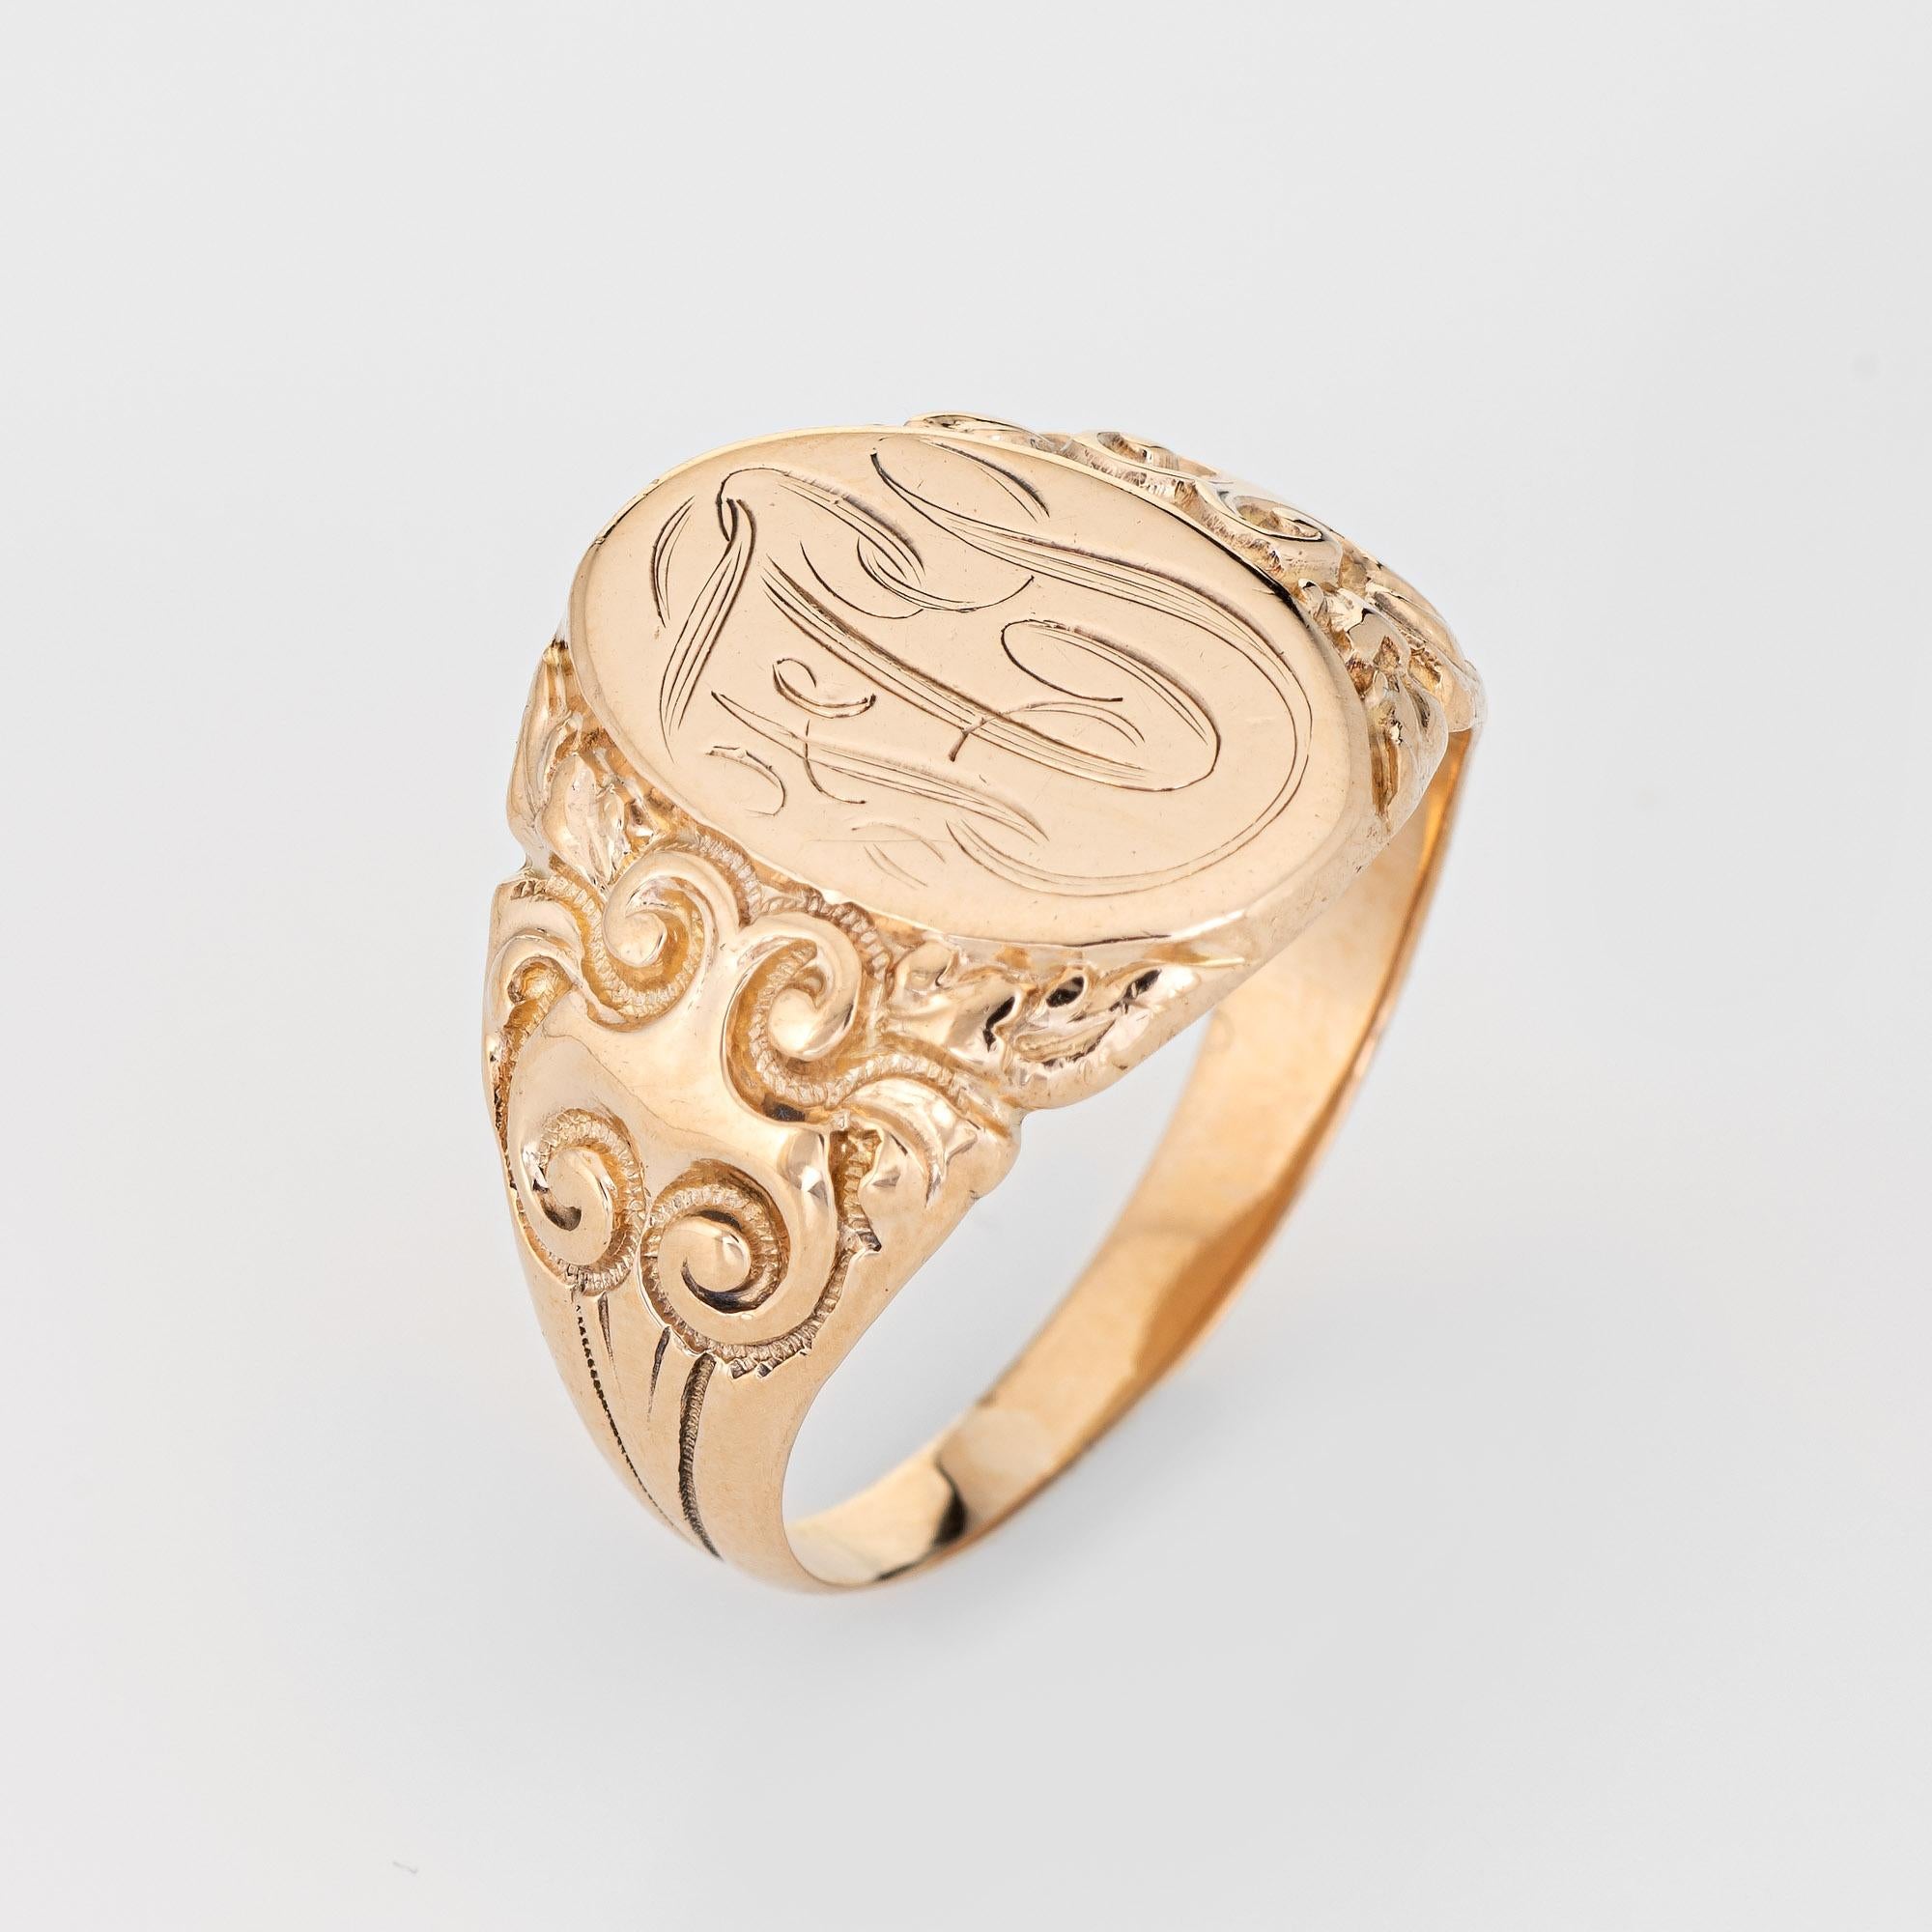 Finely detailed antique Victorian oval signet ring (circa 1880s to 1900s), crafted in 10 karat yellow gold. 

The center oval is engraved in old script with the initials (from what we can decipher) 